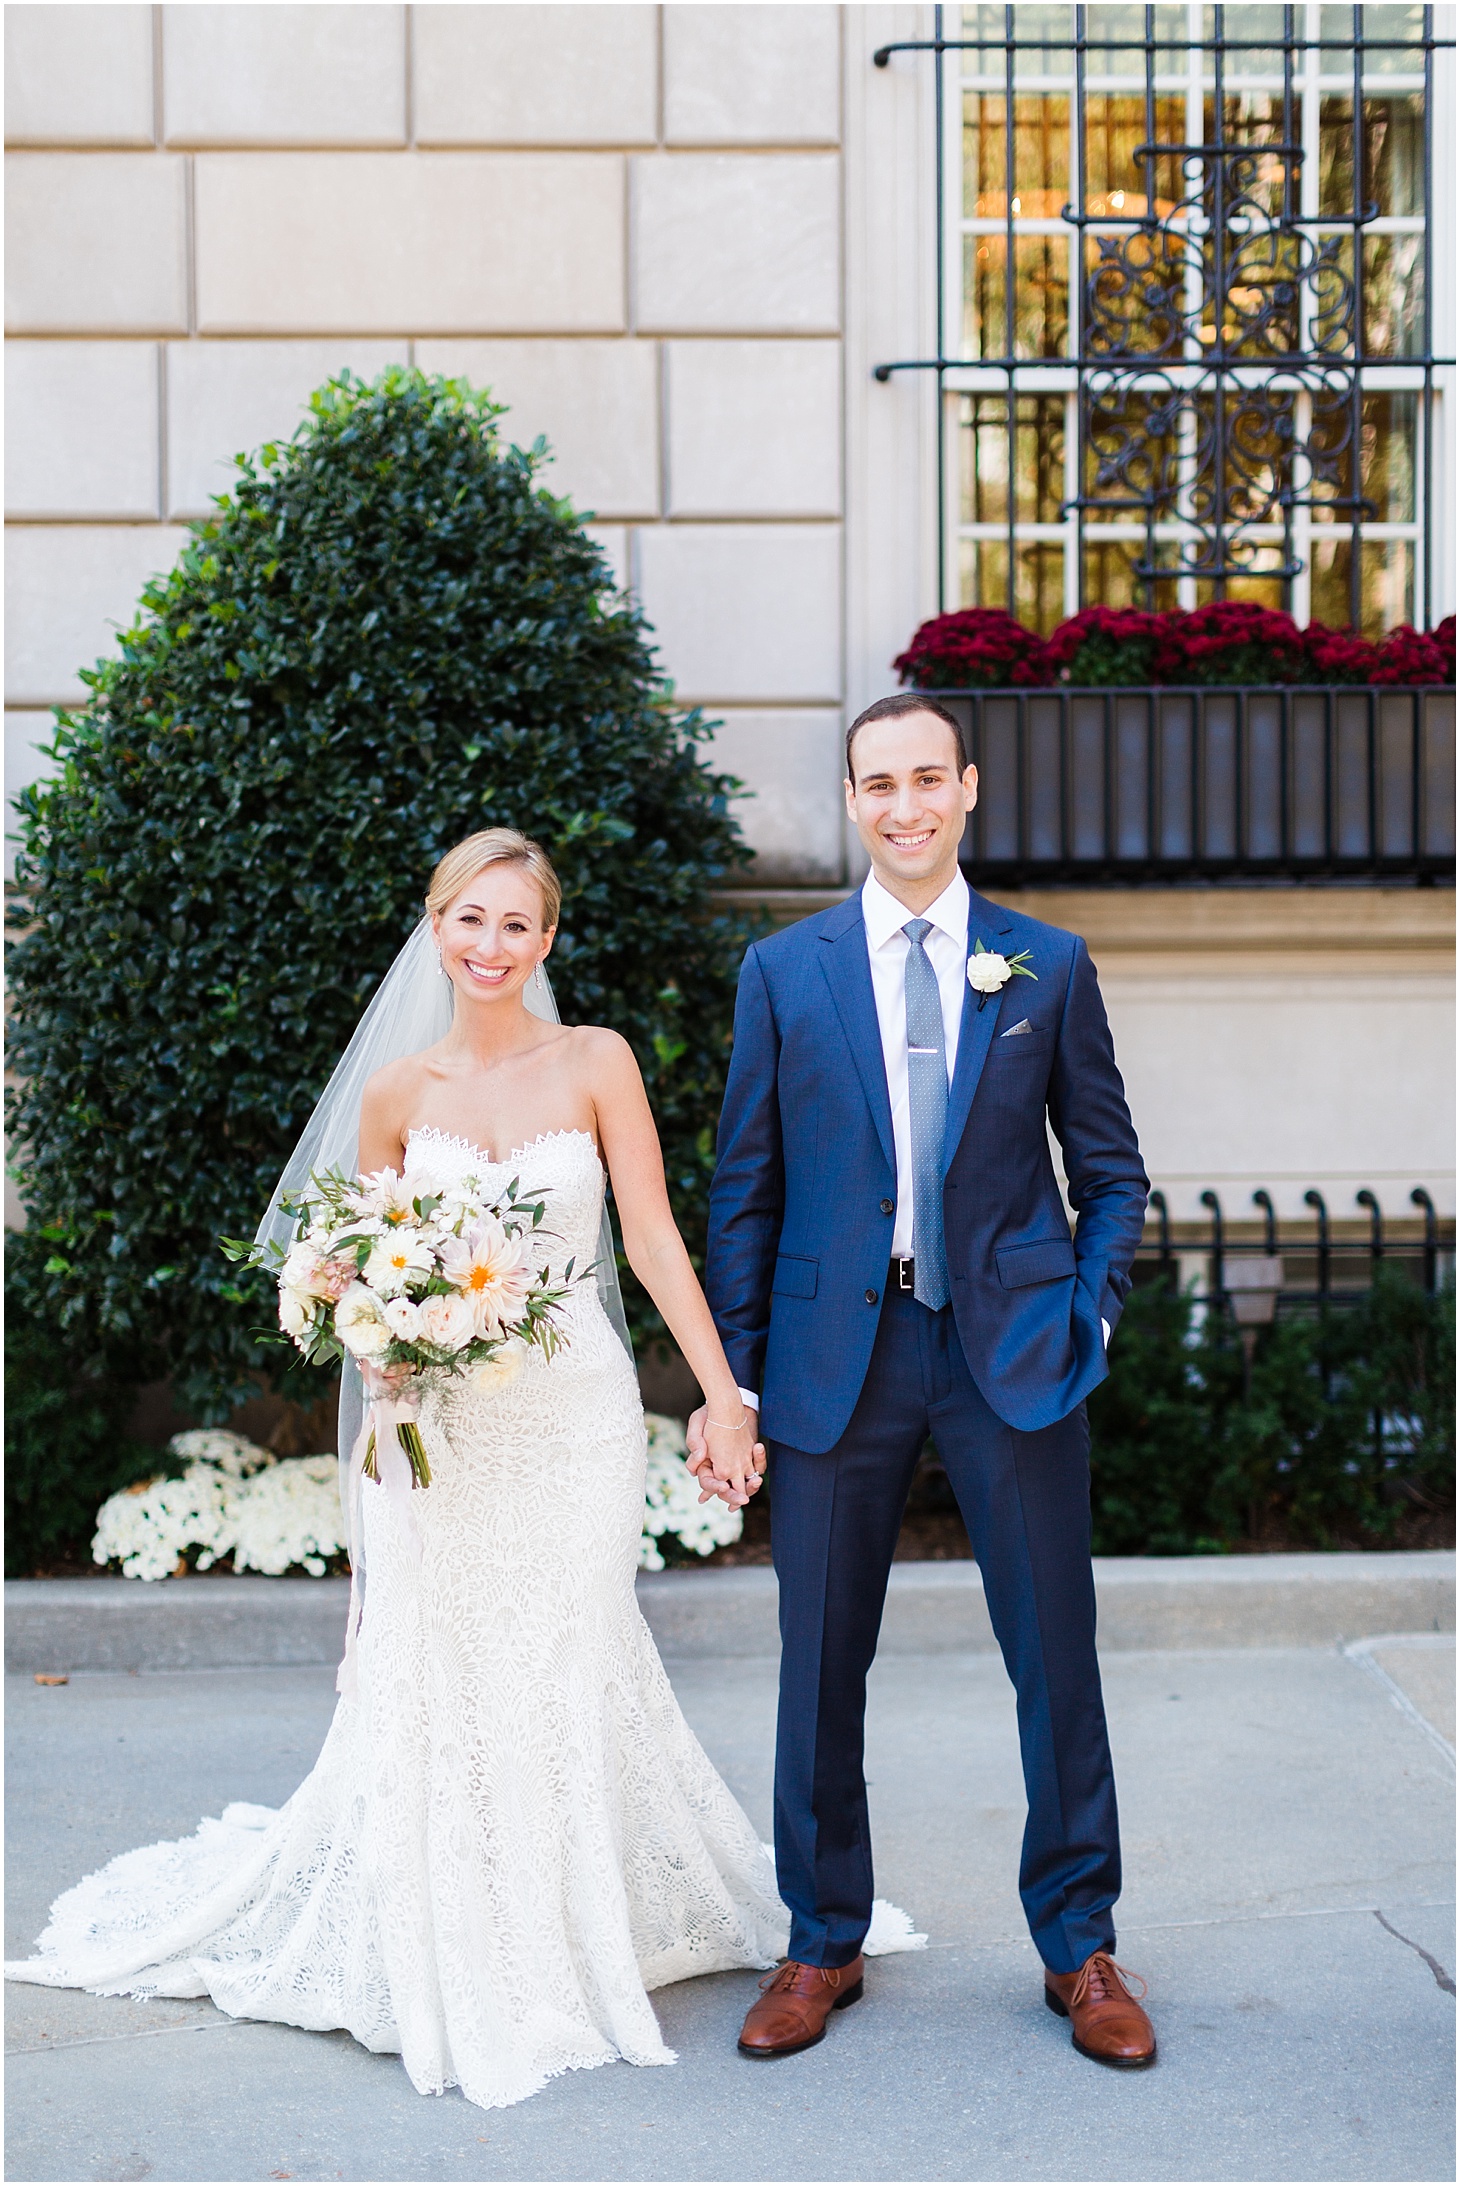 Wedding Portraits at the Hay-Adams Hotel, Toulies En Fleur Wedding Bouquet, Industrial-Chic Wedding at Long View Gallery in DC, Sarah Bradshaw Photography, DC Wedding Photographer